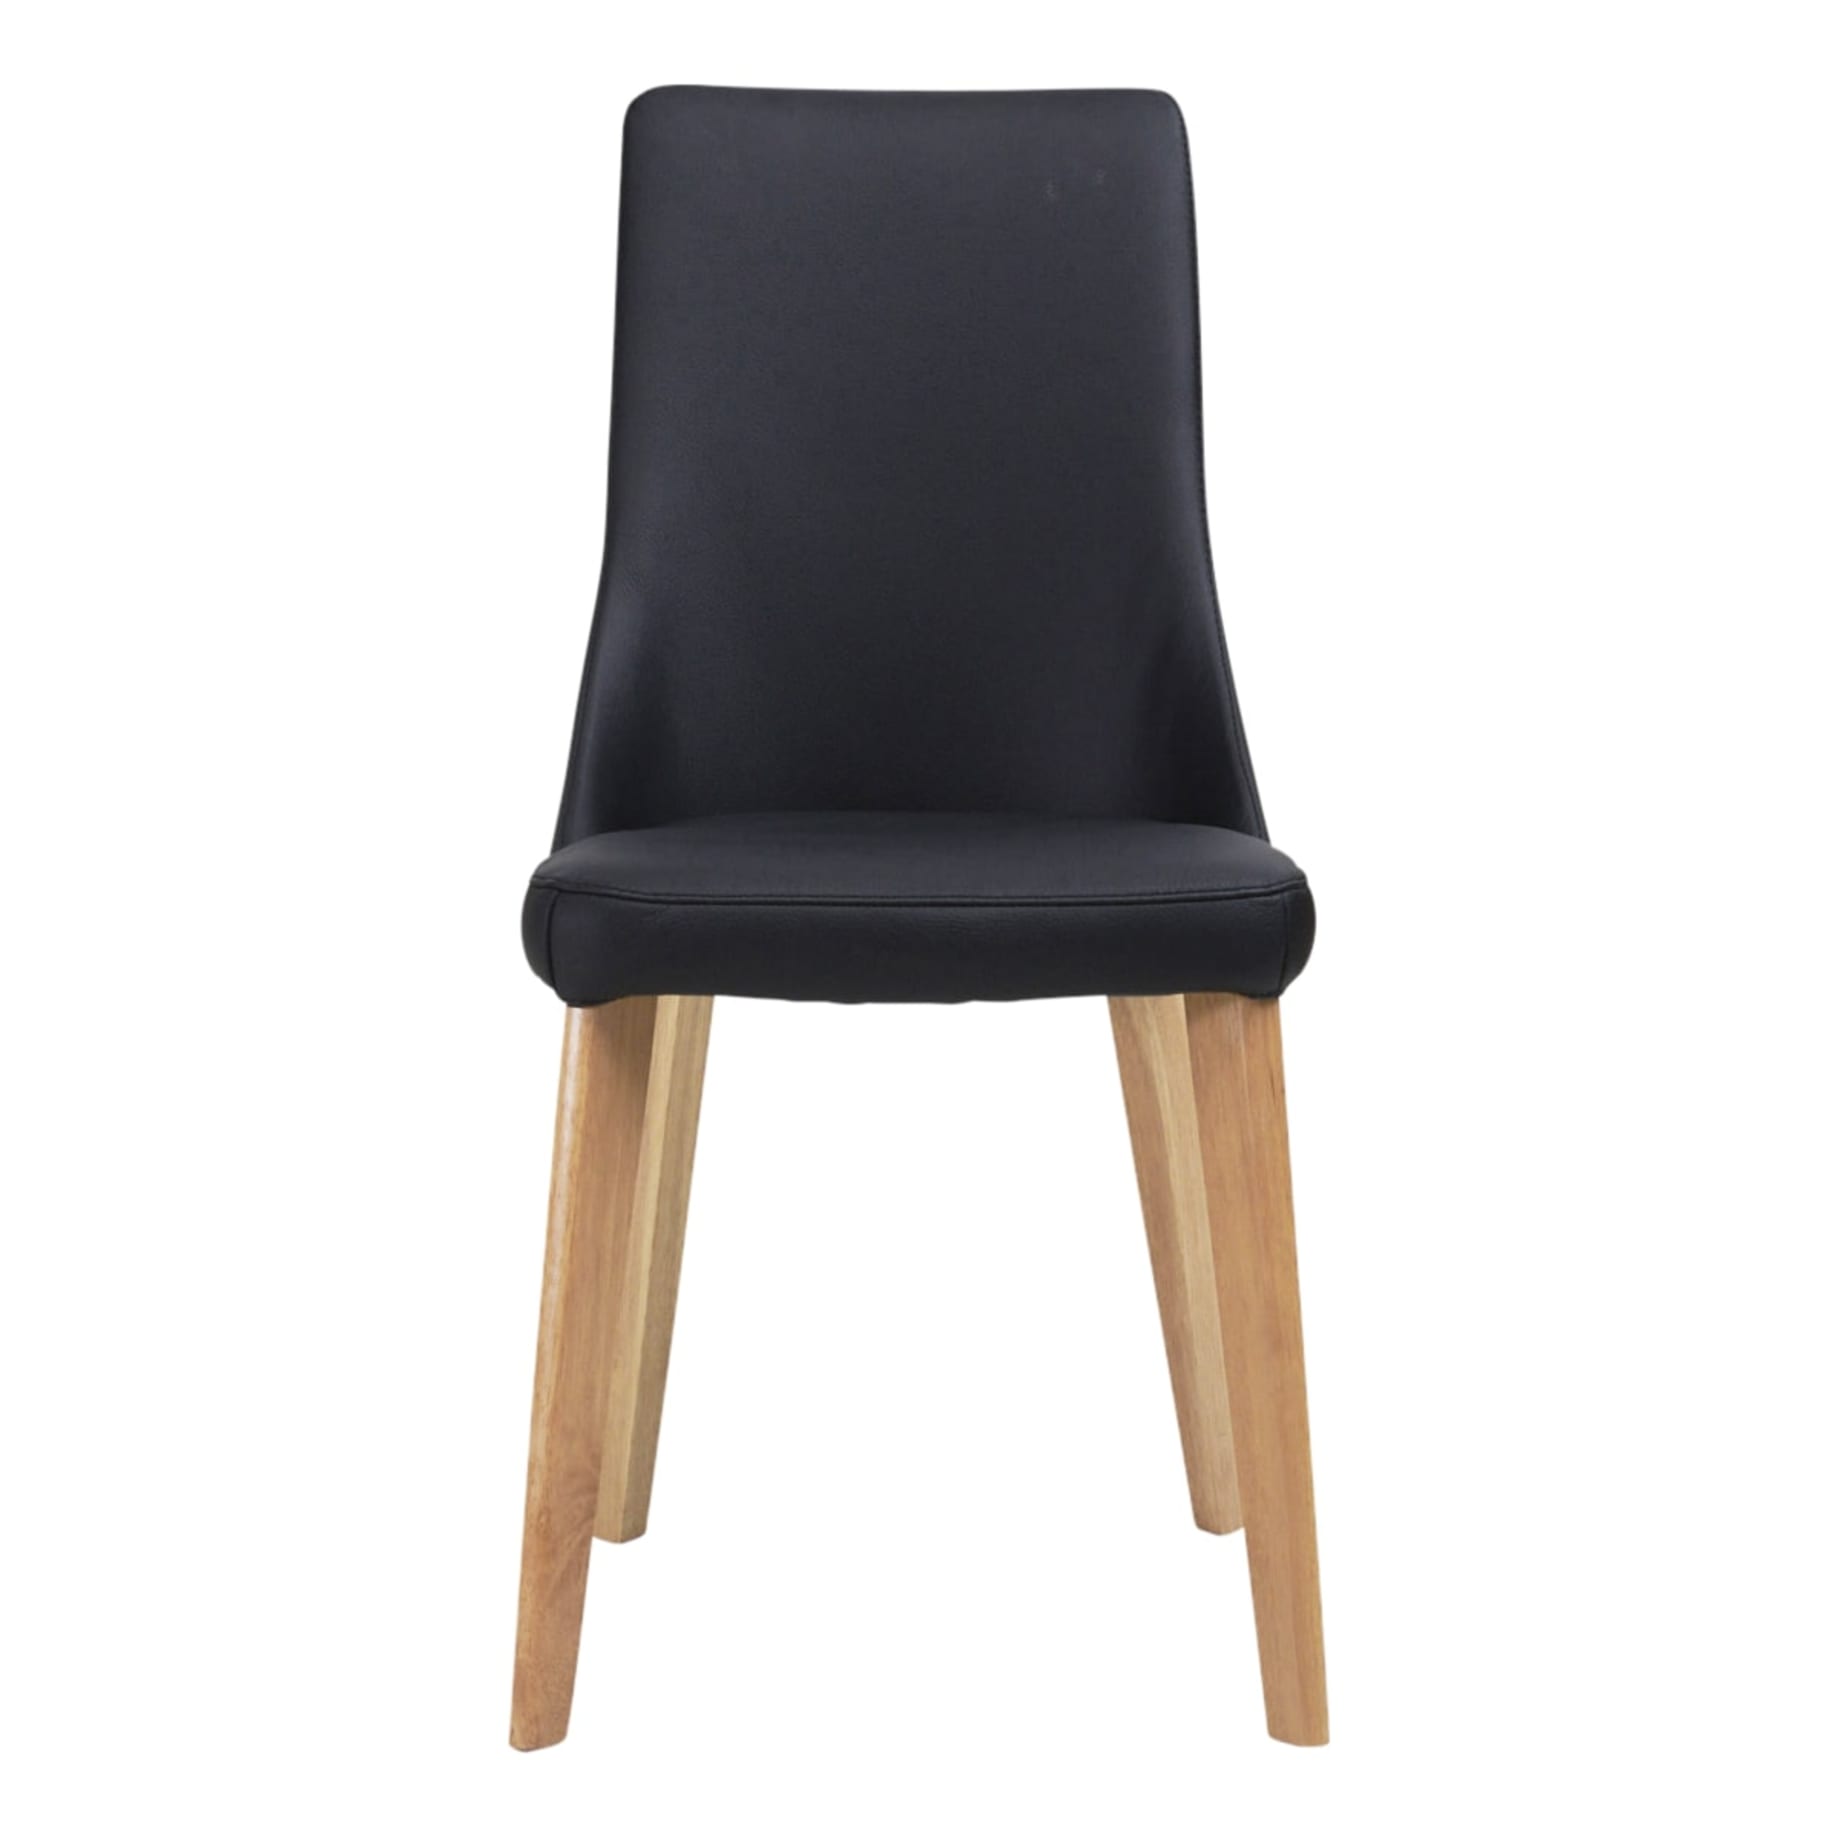 Panama Dining Chair in Black Leather/Oak Stain